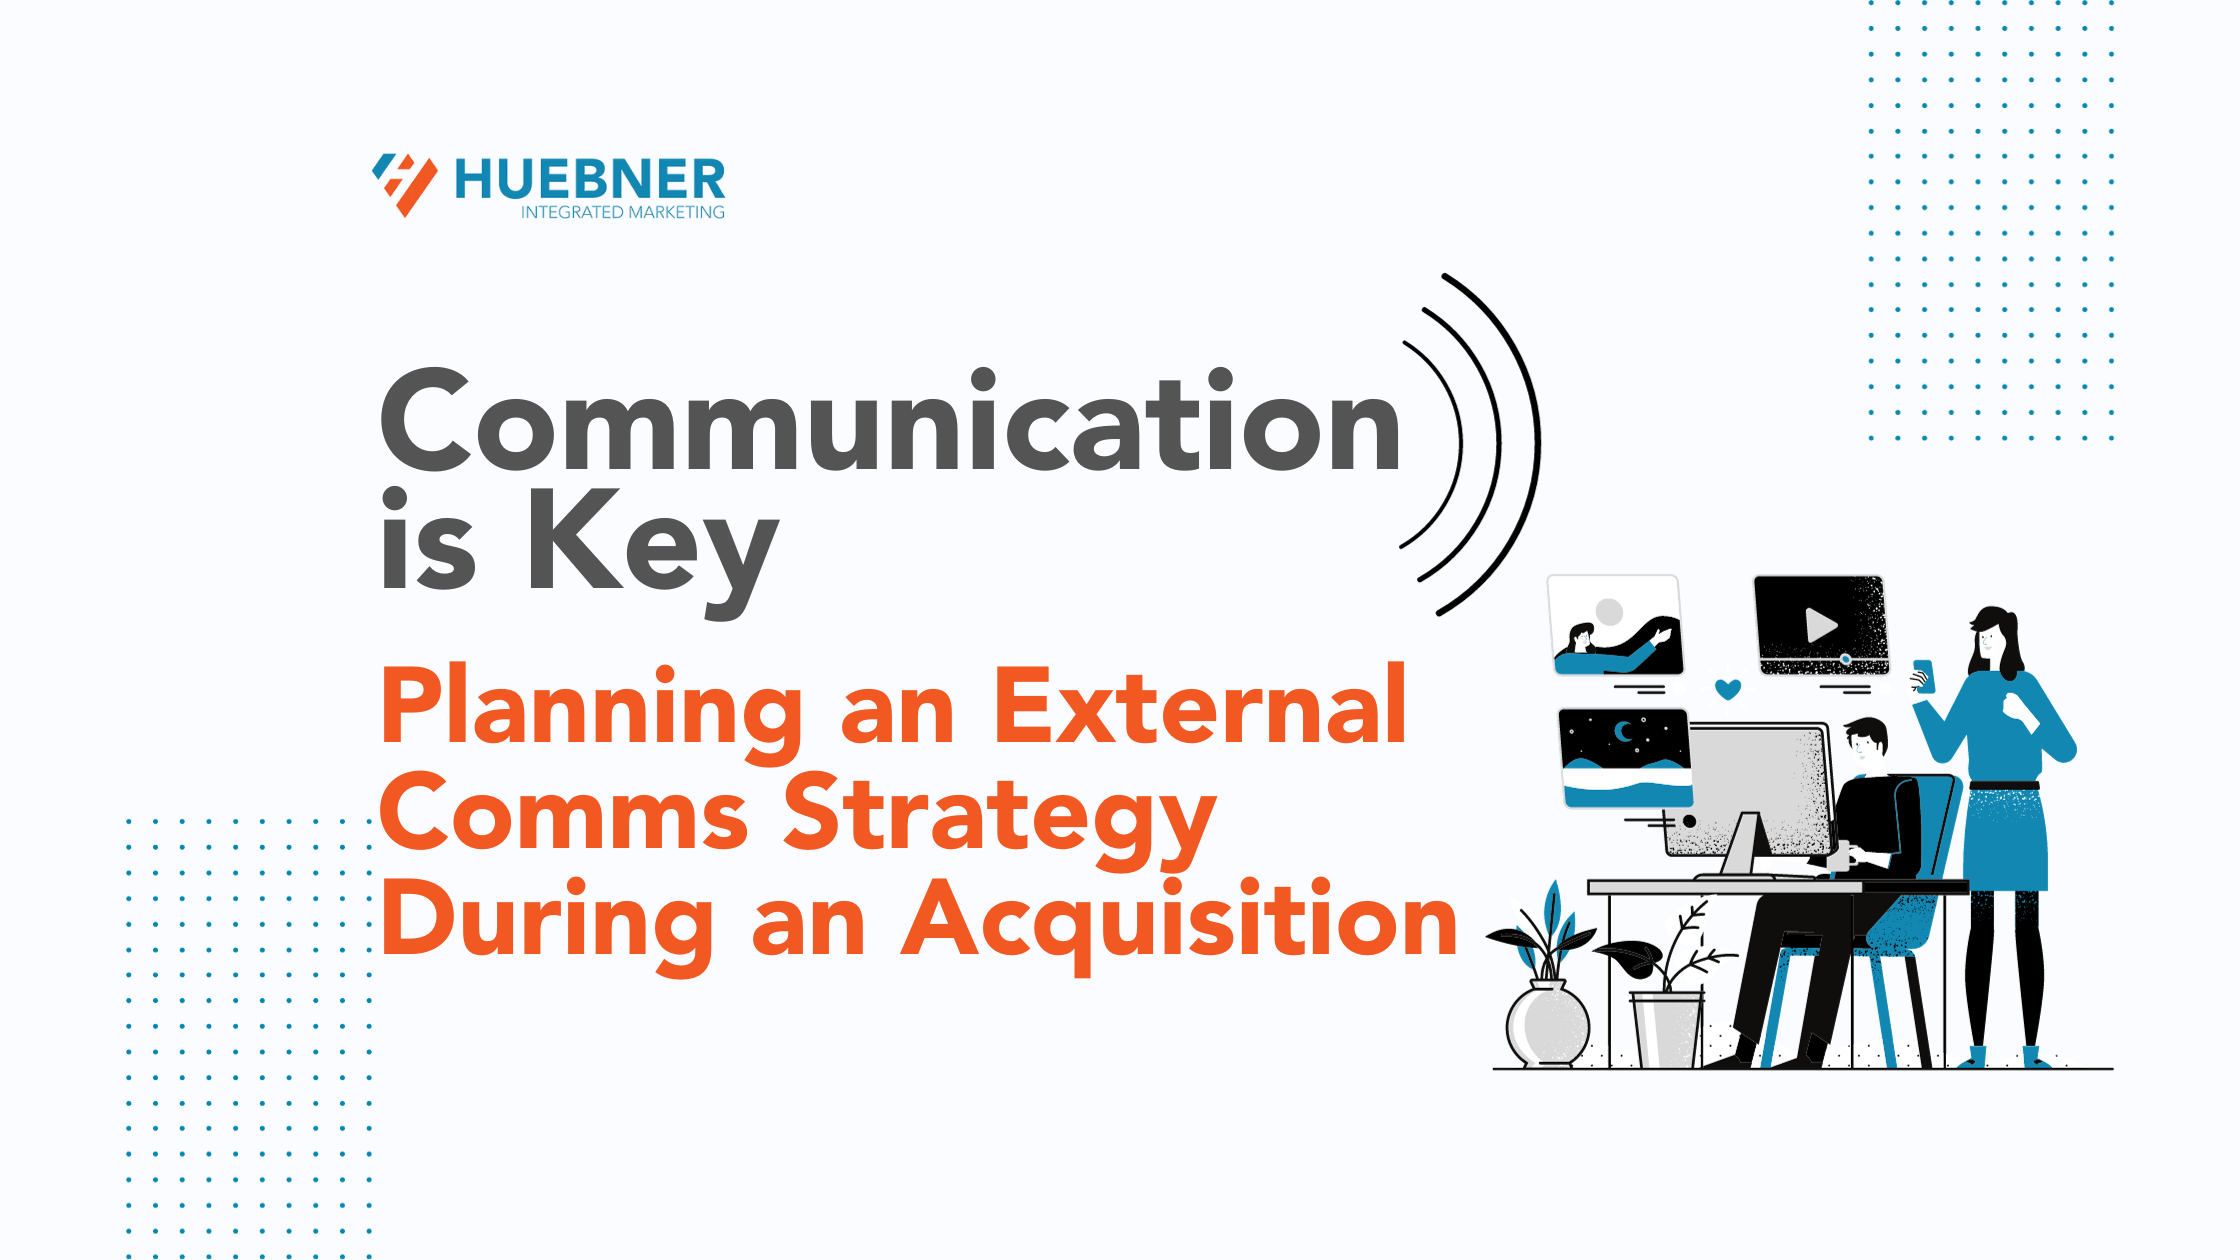 Planning an External Comms Strategy during an Acquisition